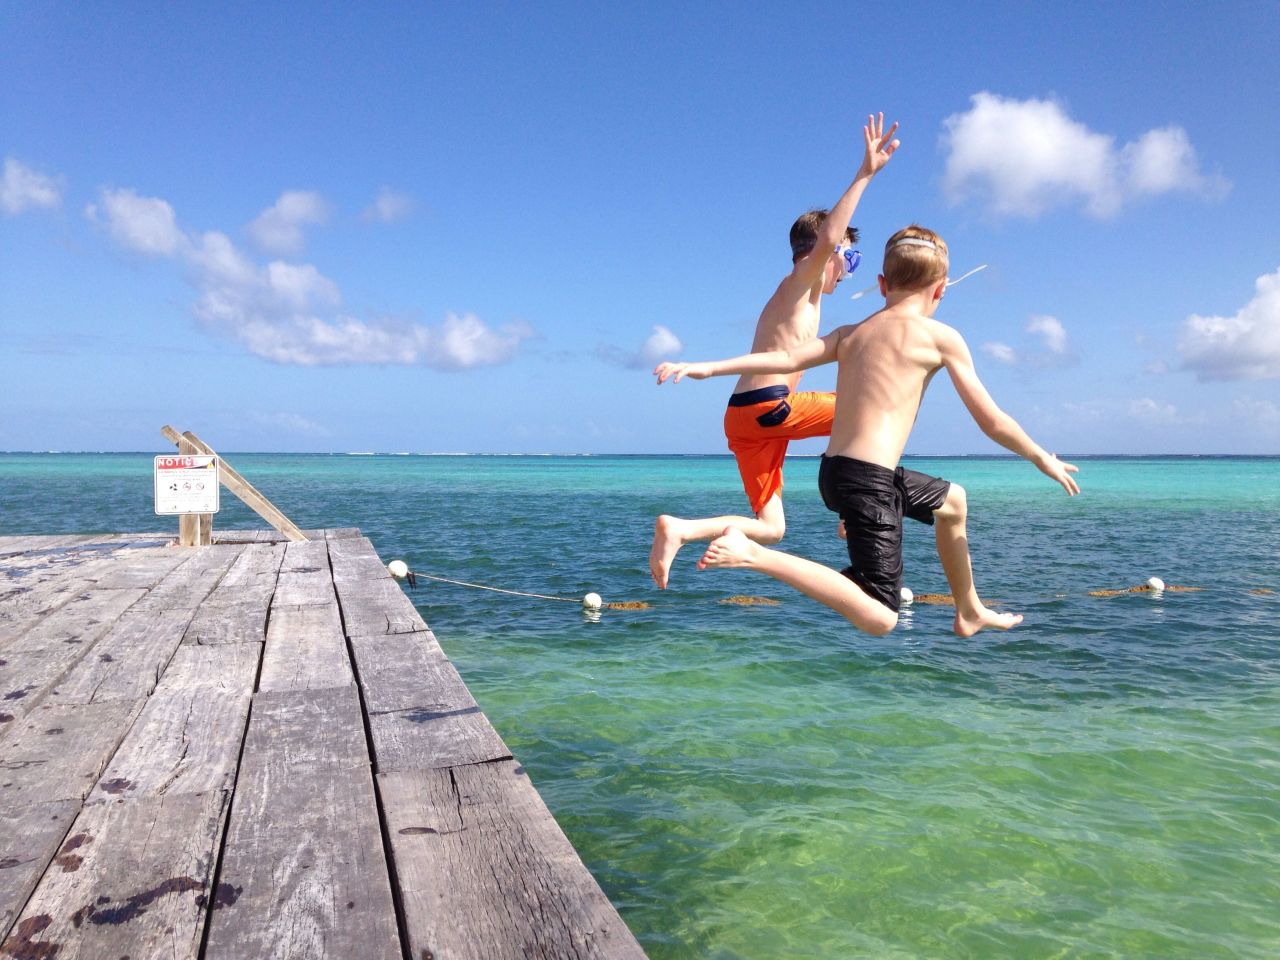 <a href="http://ireport.cnn.com/docs/DOC-1221638">Courtney Hershberger</a> took this shot of her sons Ty and Luke jumping off the dock at Las Terrazas resort on Ambergris Caye. It was Christmas Day 2013. Ambergris Caye is Belize's largest island.<br />